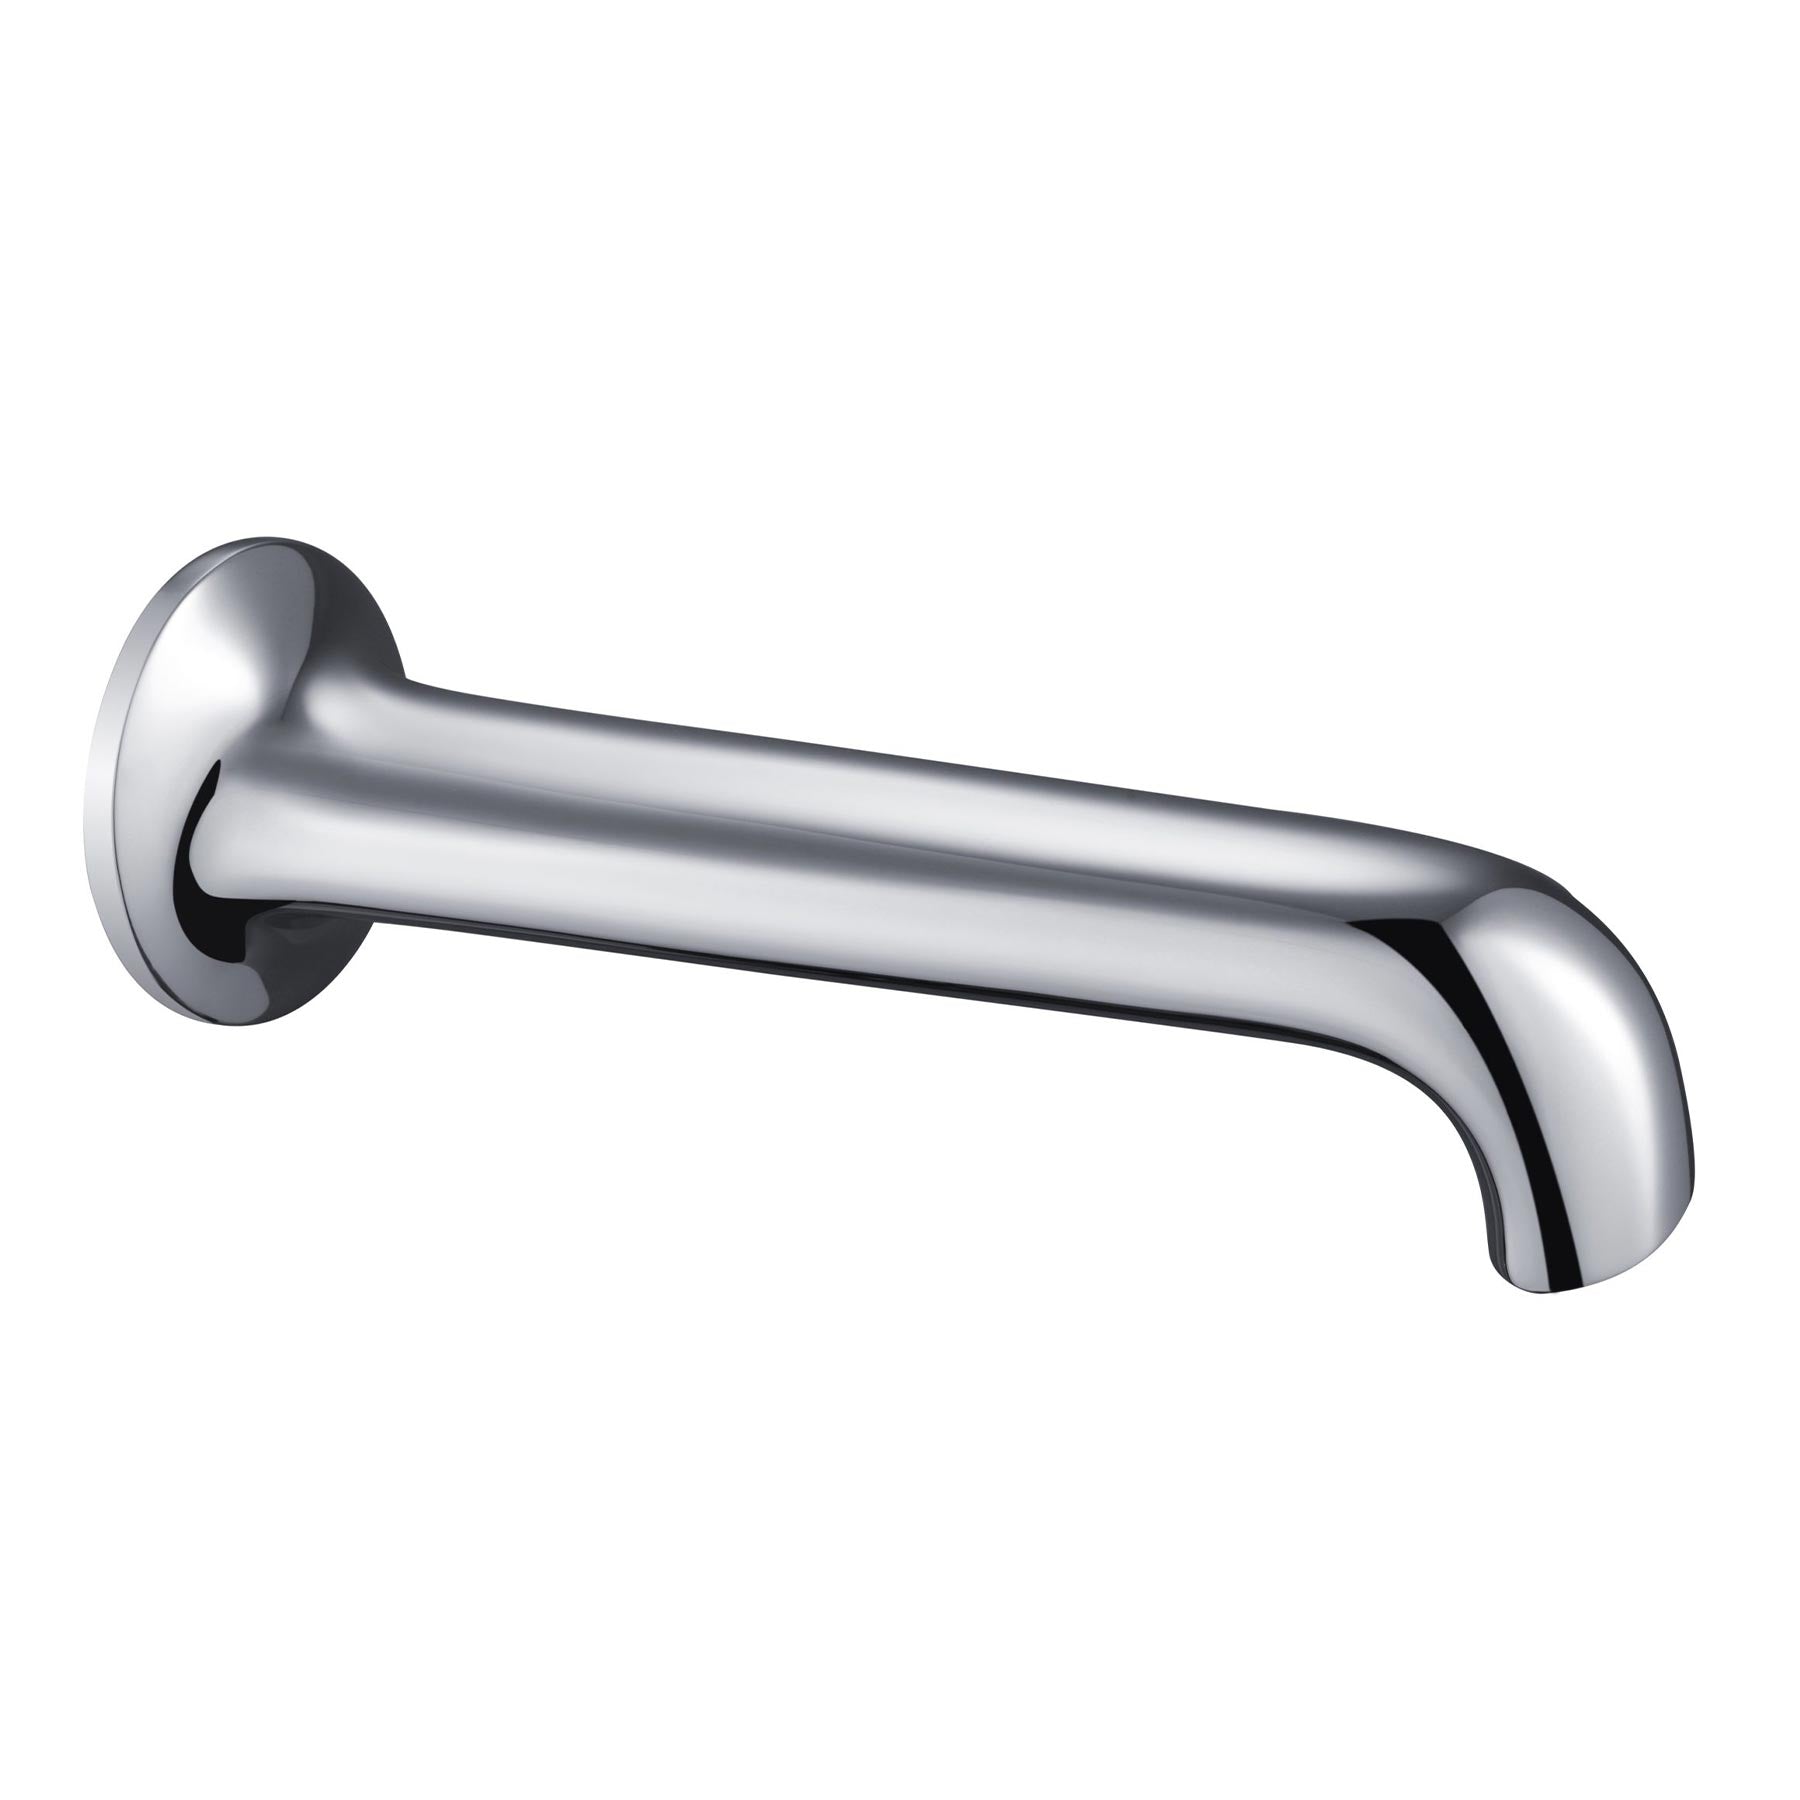 Chester Lever Chrome Bath Spout. Mounted on your wall over the bath and easy to clean